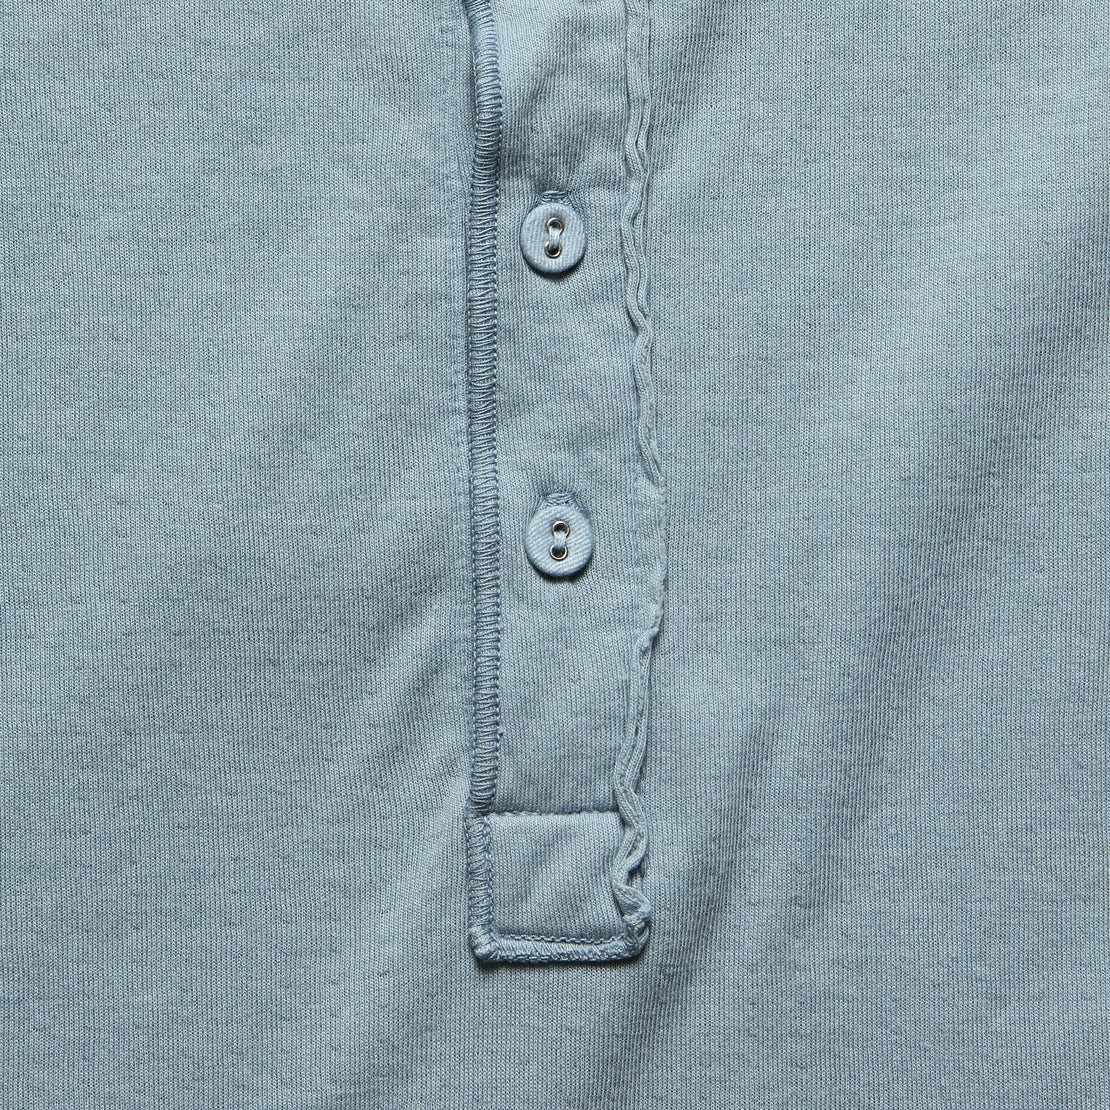 Pointelle Henley - Light Blue - Save Khaki - STAG Provisions - Tops - L/S Knit